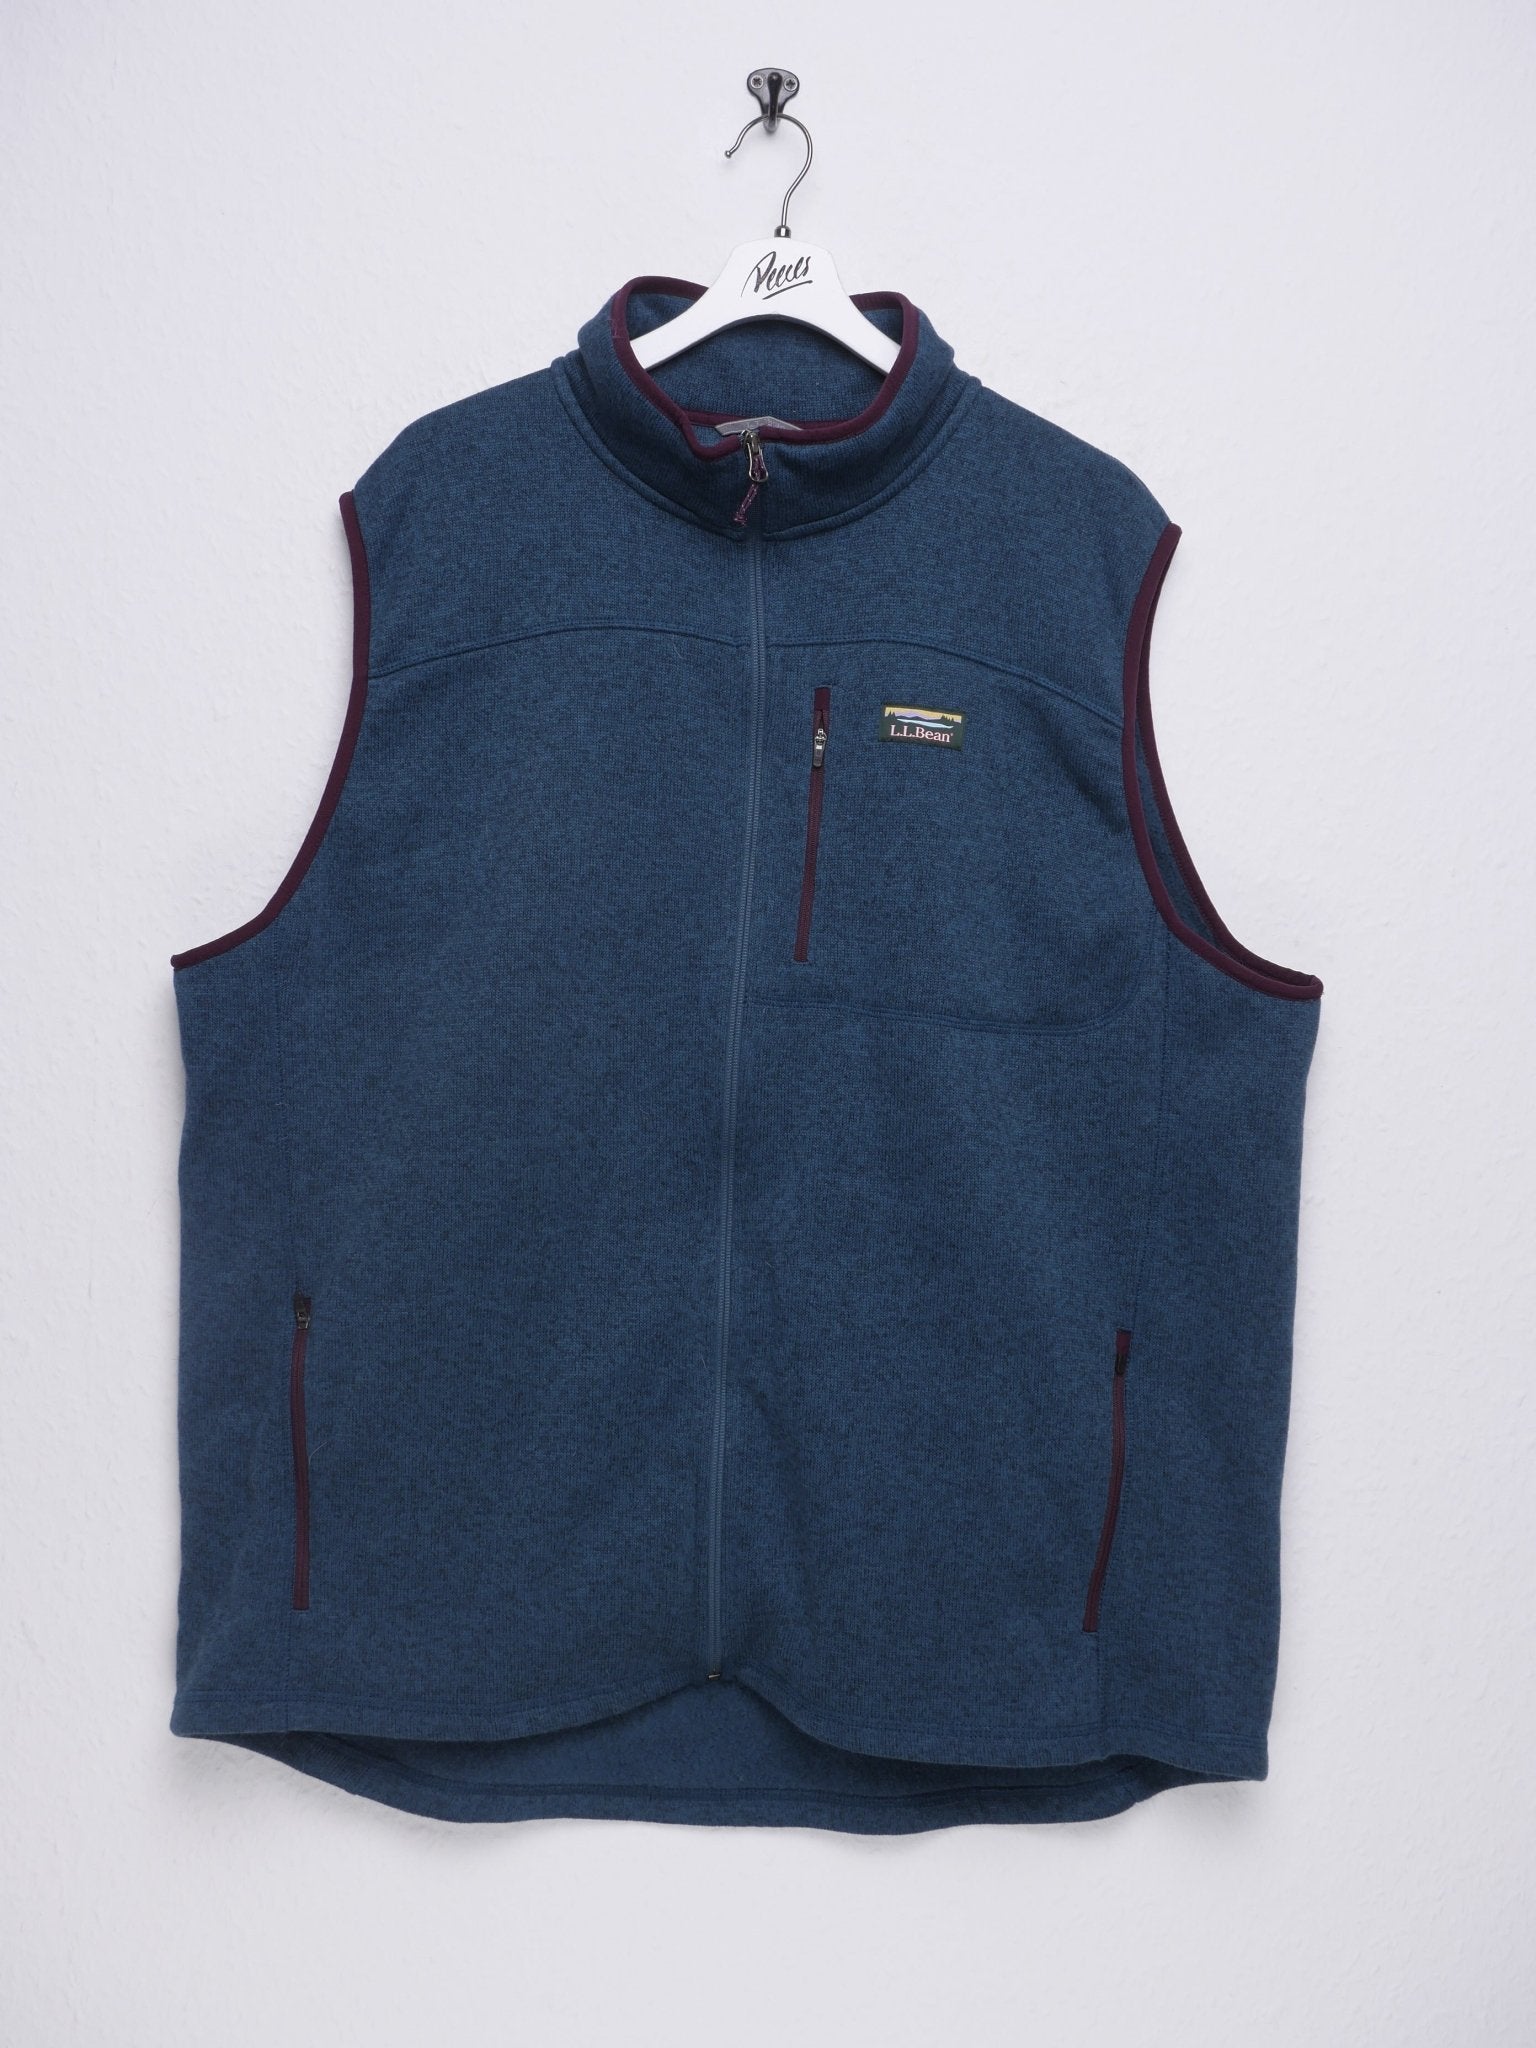 L.L.Bean embroidered Logopatch wool vest Jacke - Peeces